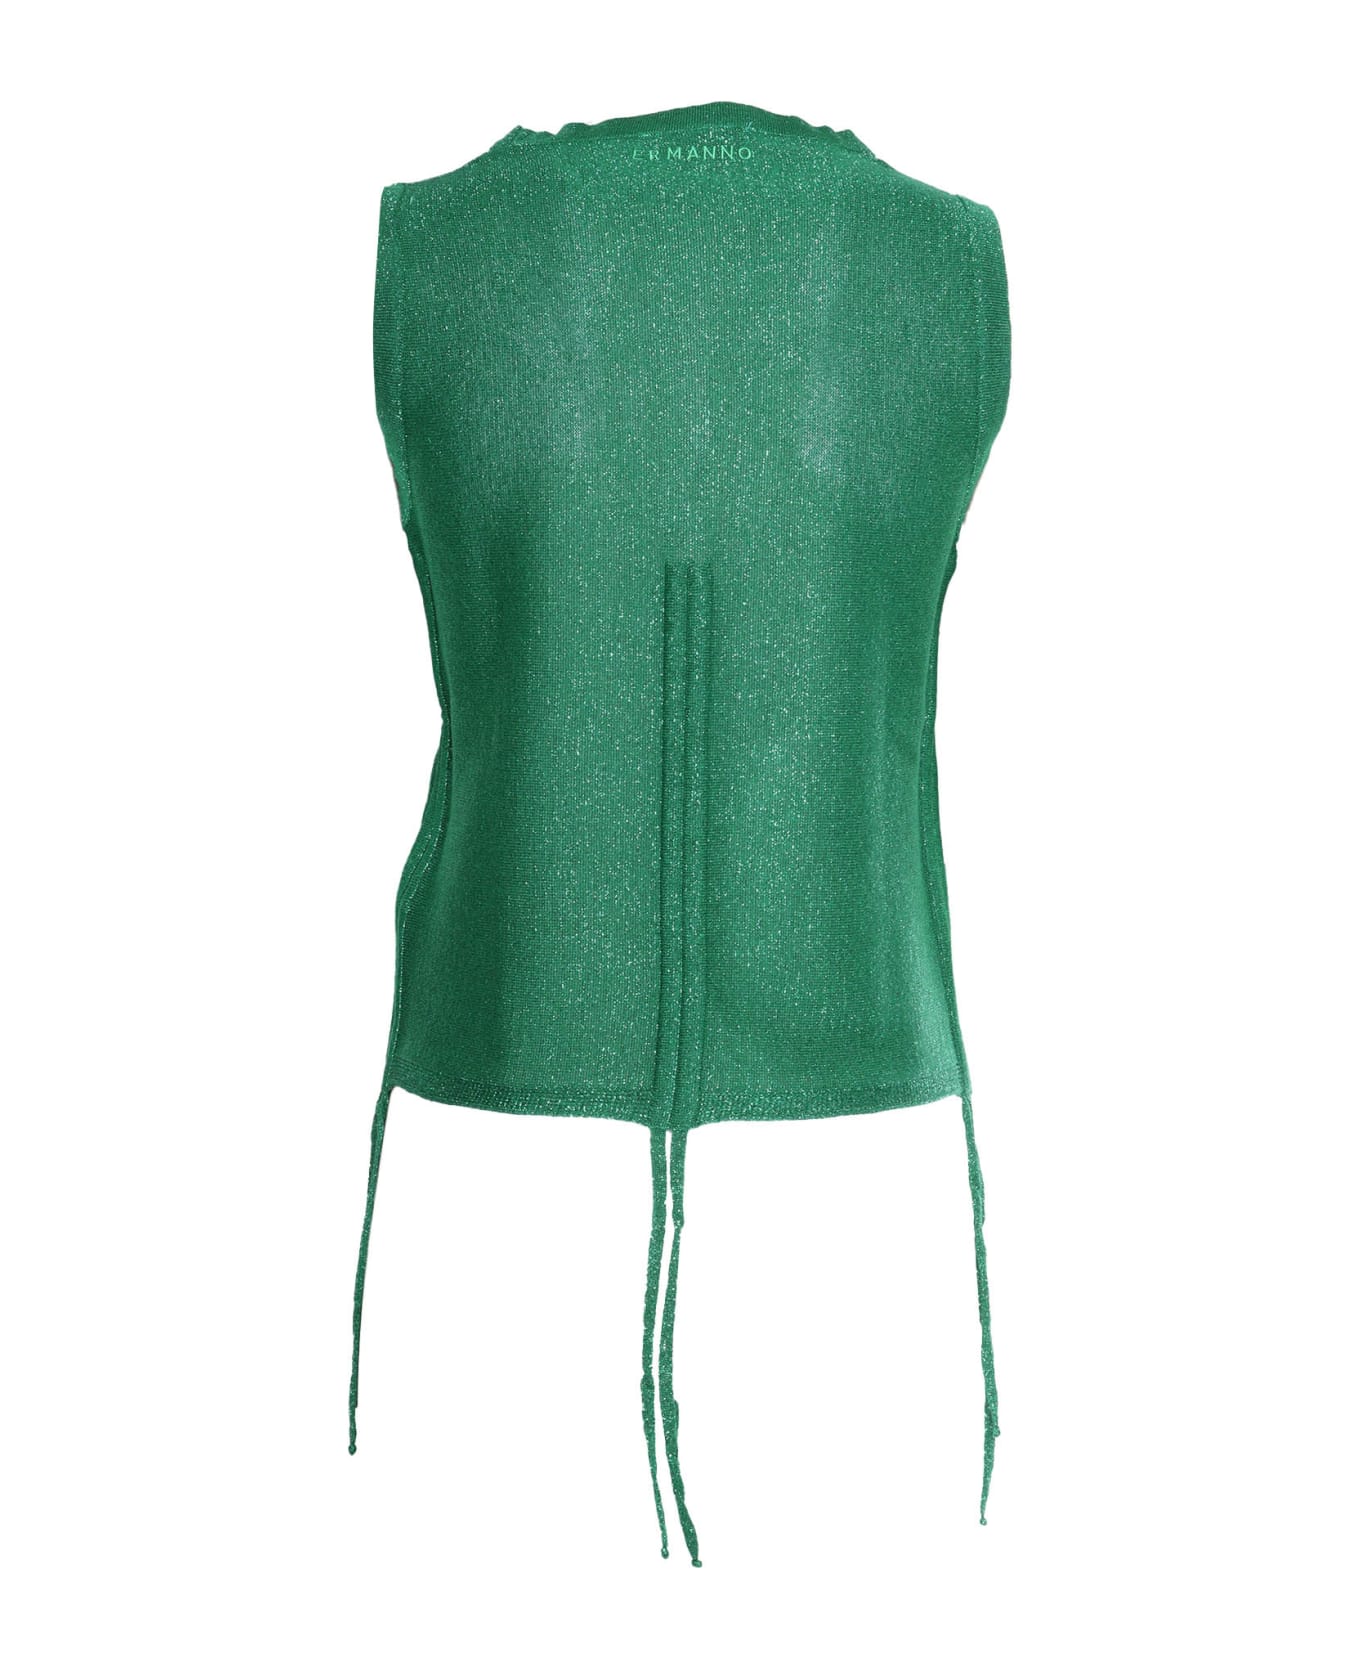 Ermanno Ermanno Scervino Green Knitted Top - GREEN